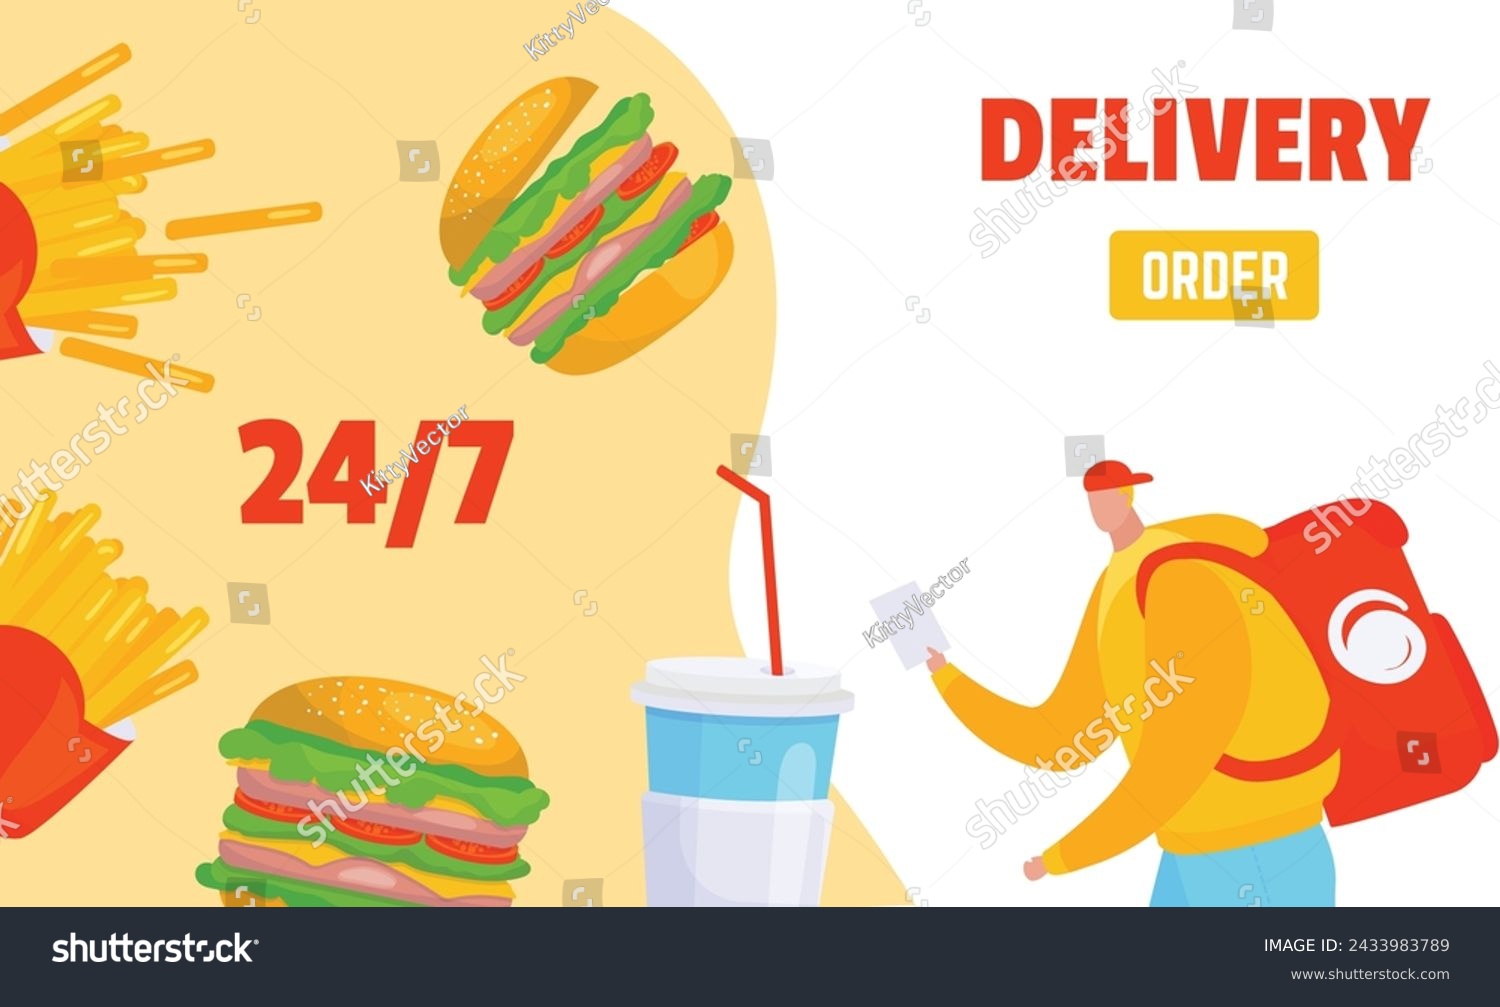 SVG of Delivery person red cap yellow jacket holding receipt near fast food items. Food delivery service concept courier, burger, fries, soda. Fast, convenient meal ordering vector illustration svg